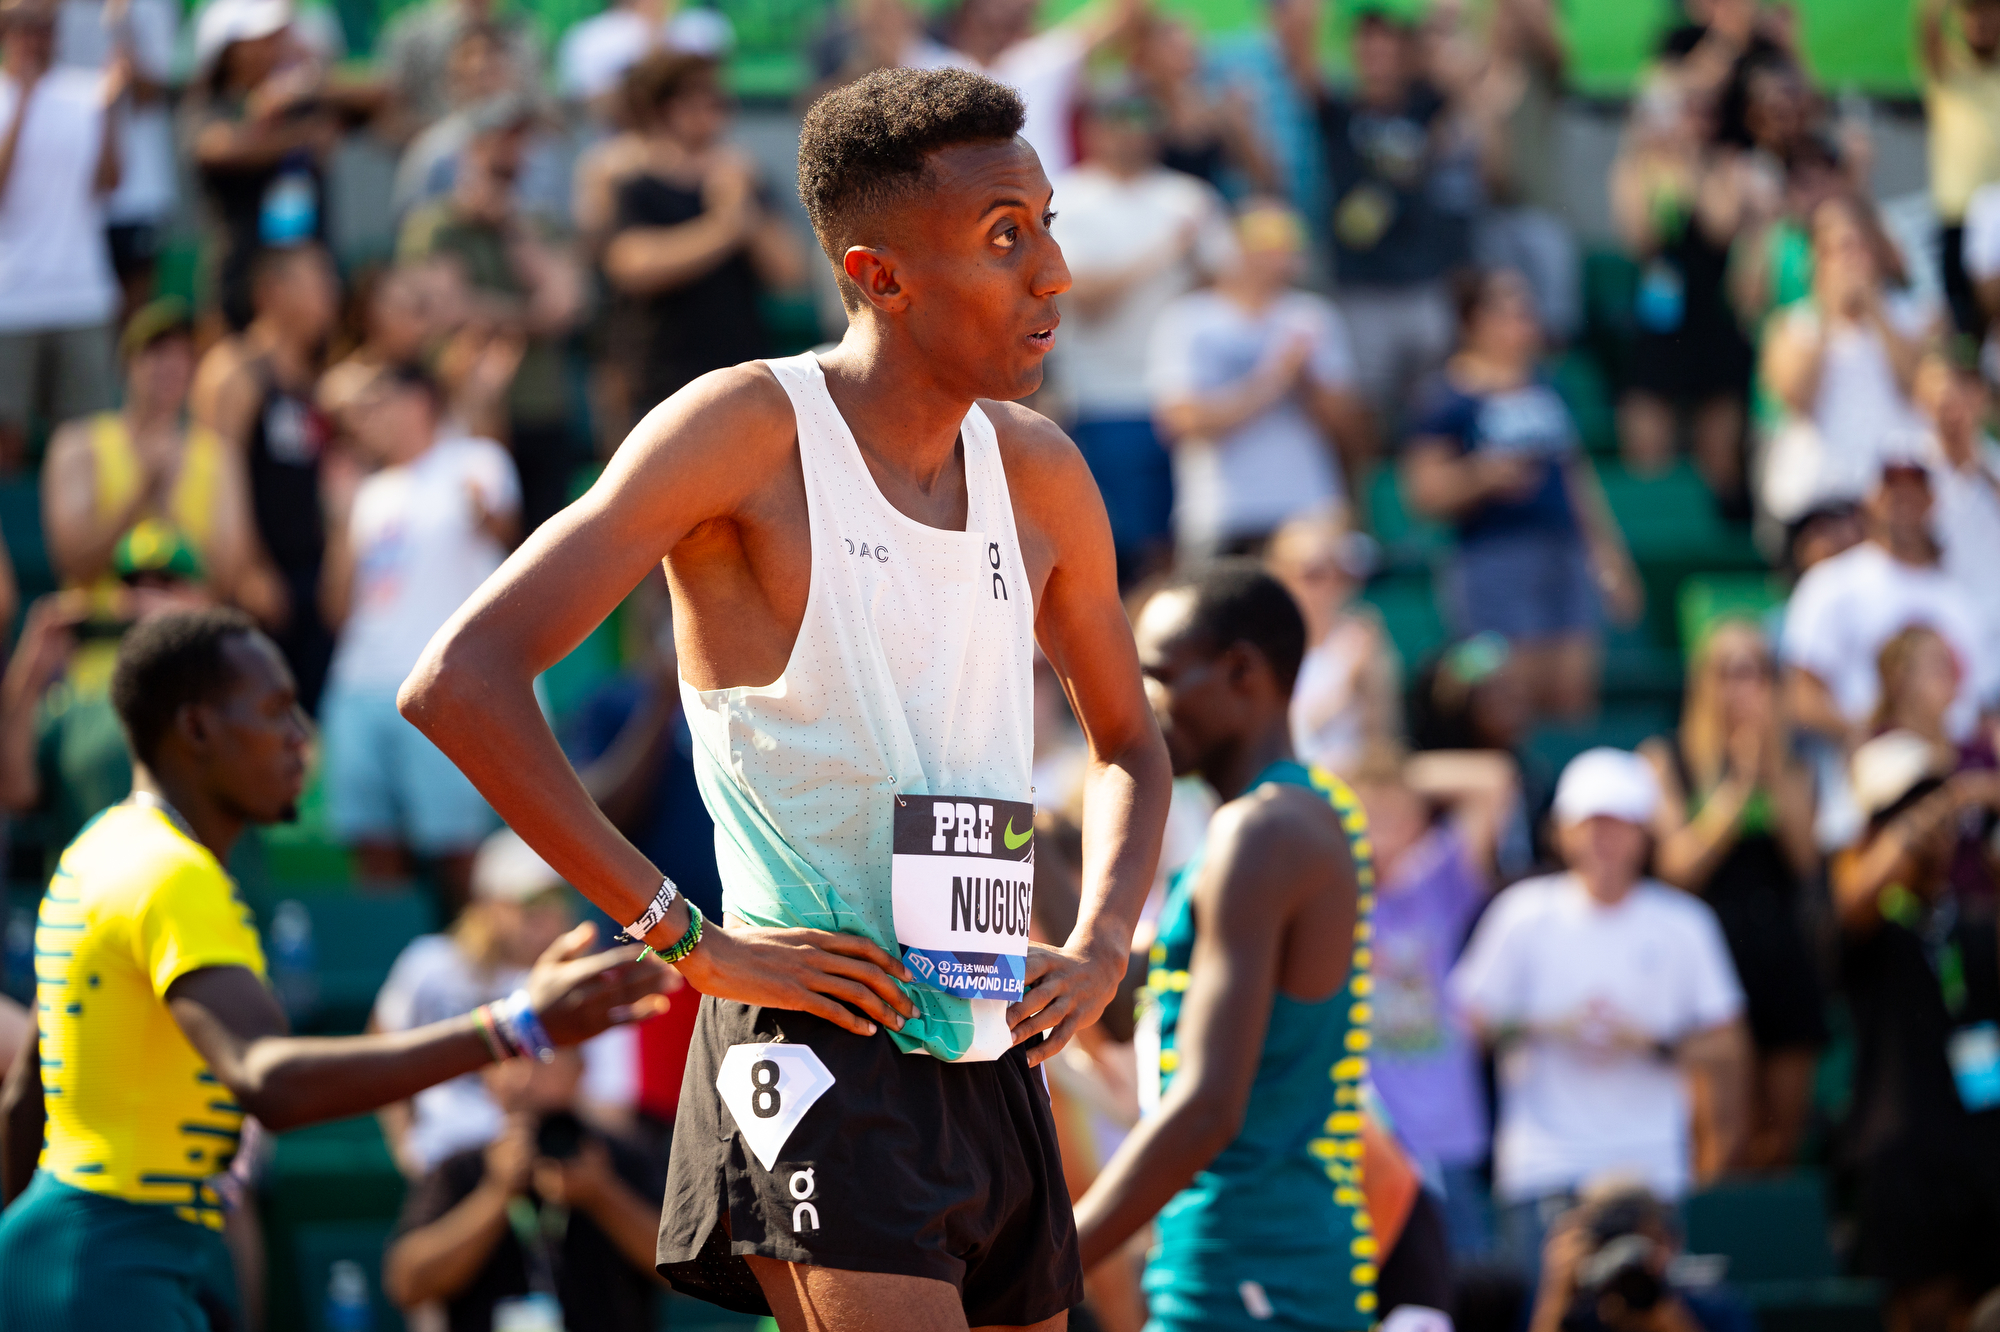 Prefontaine Classic: A preview of what to watch during Saturday's meet